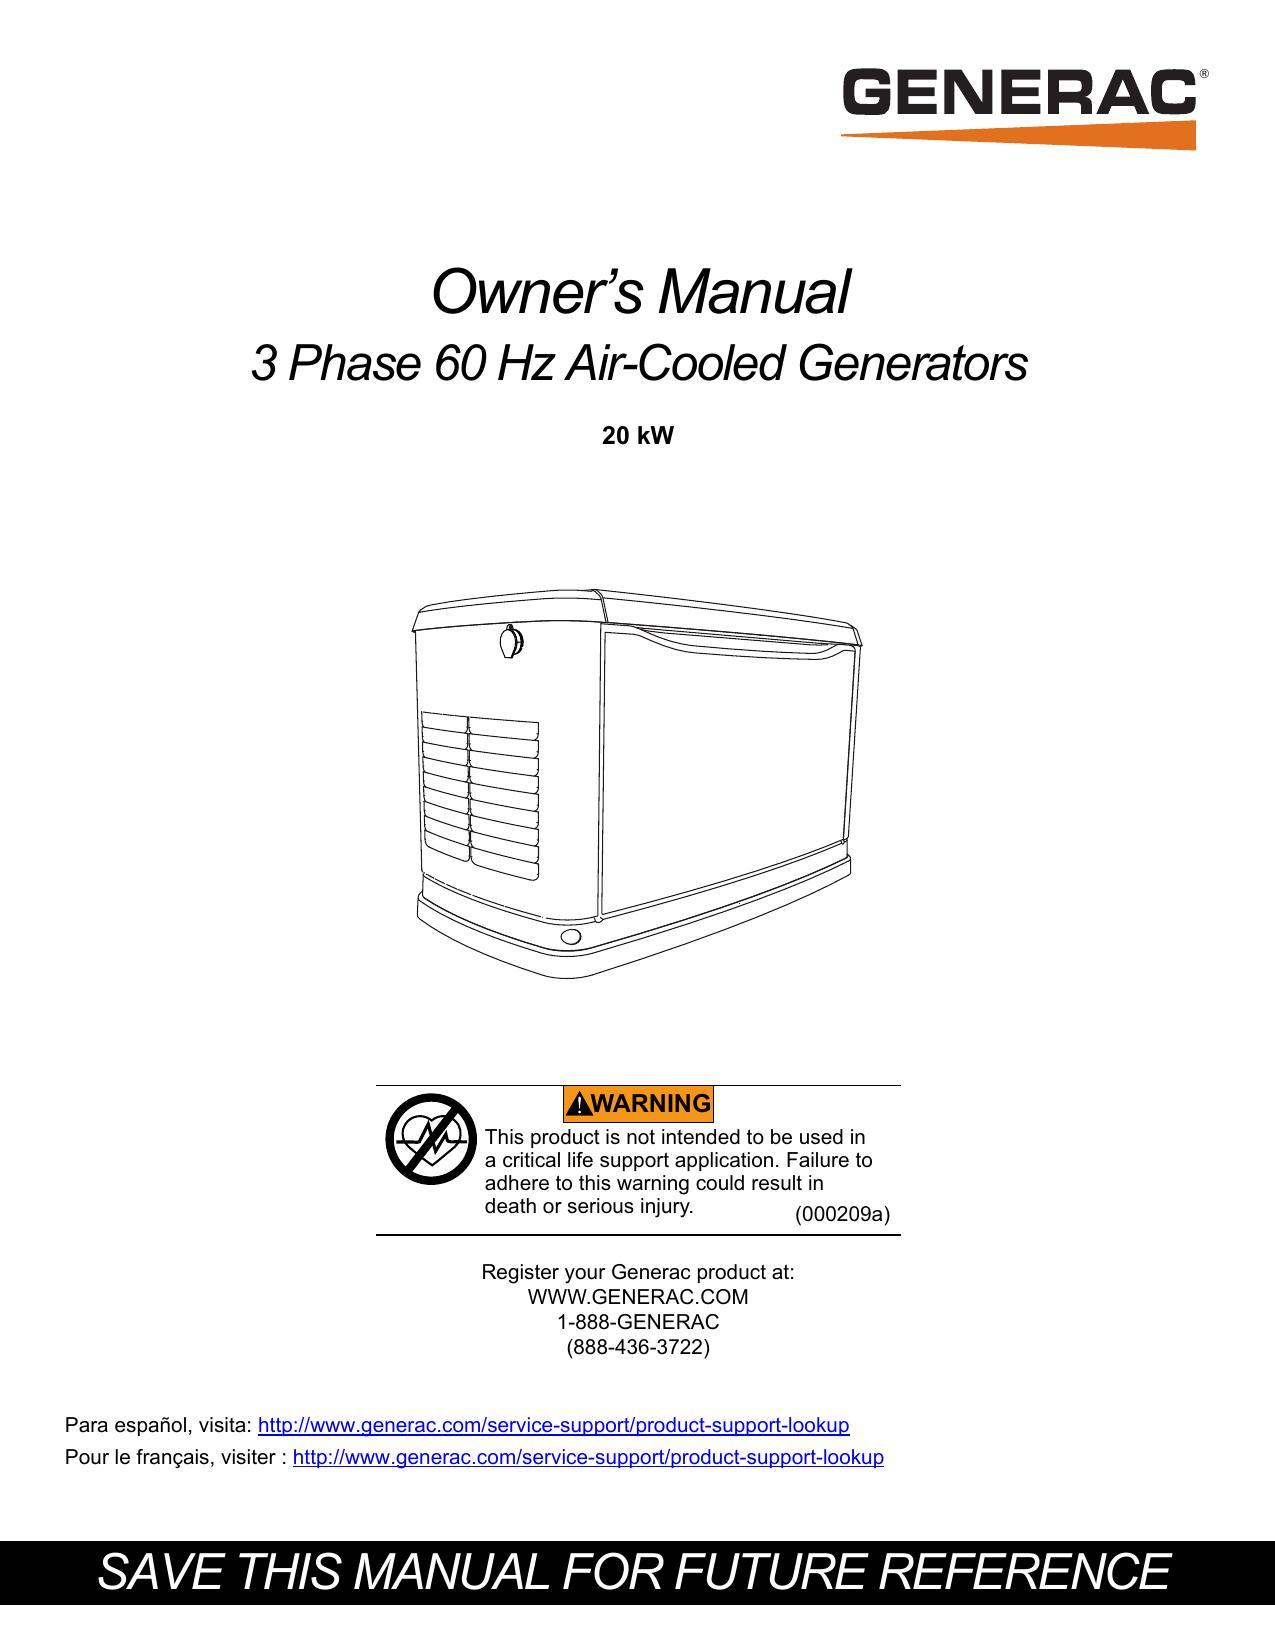 owners-manual-for-60-hz-air-cooled-generators-20-kw.pdf